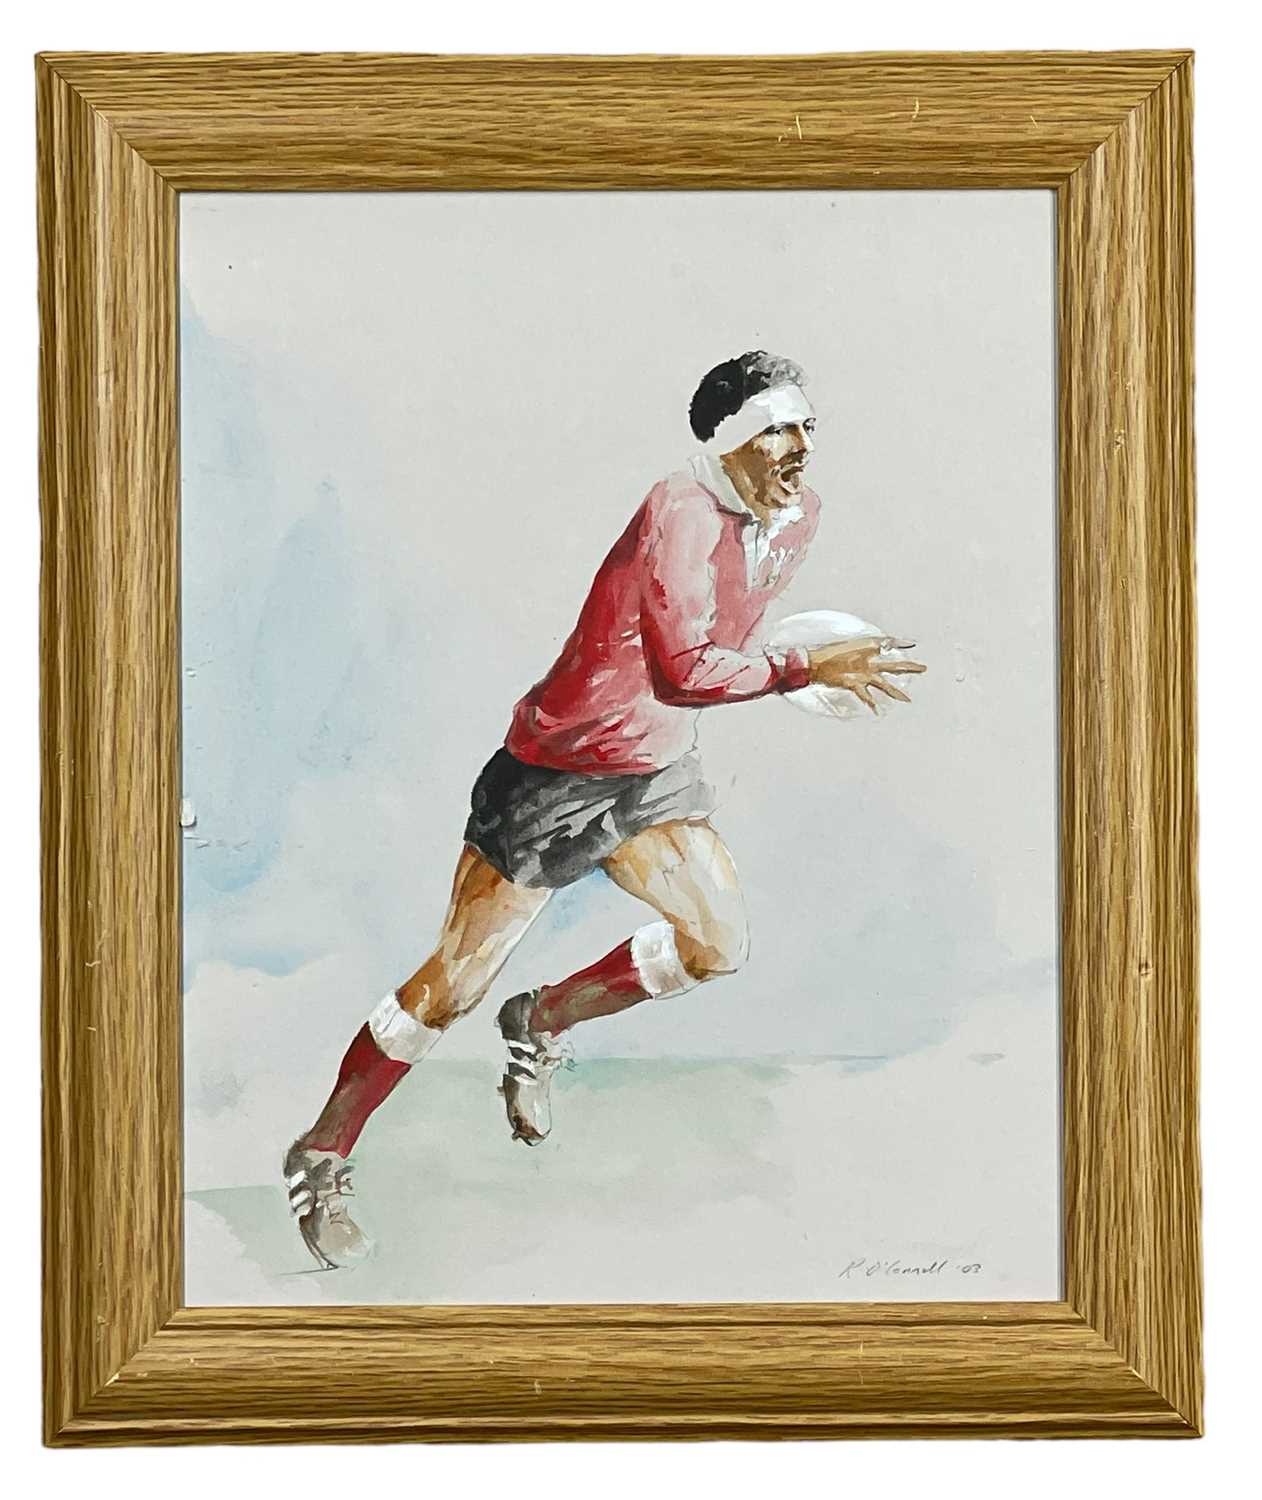 SPORTING MEMORABILIA, including five paintings of Welsh rugby players by artist Richard O'Connell, - Image 14 of 16